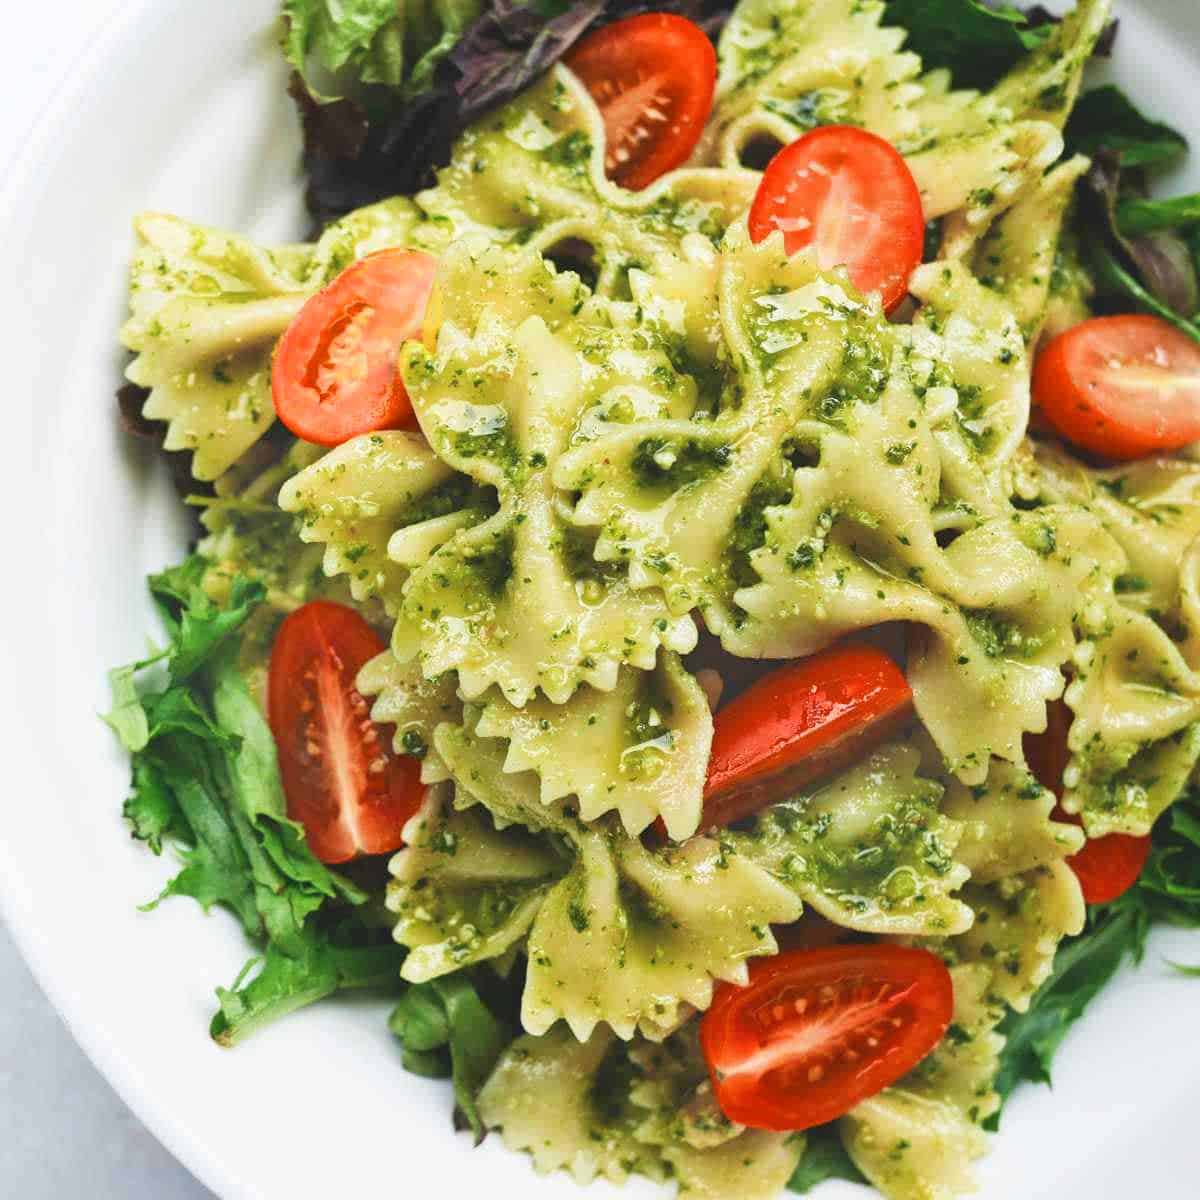 A plate of bowtie pasta with mint basil pesto sauce and chopped tomatoes.